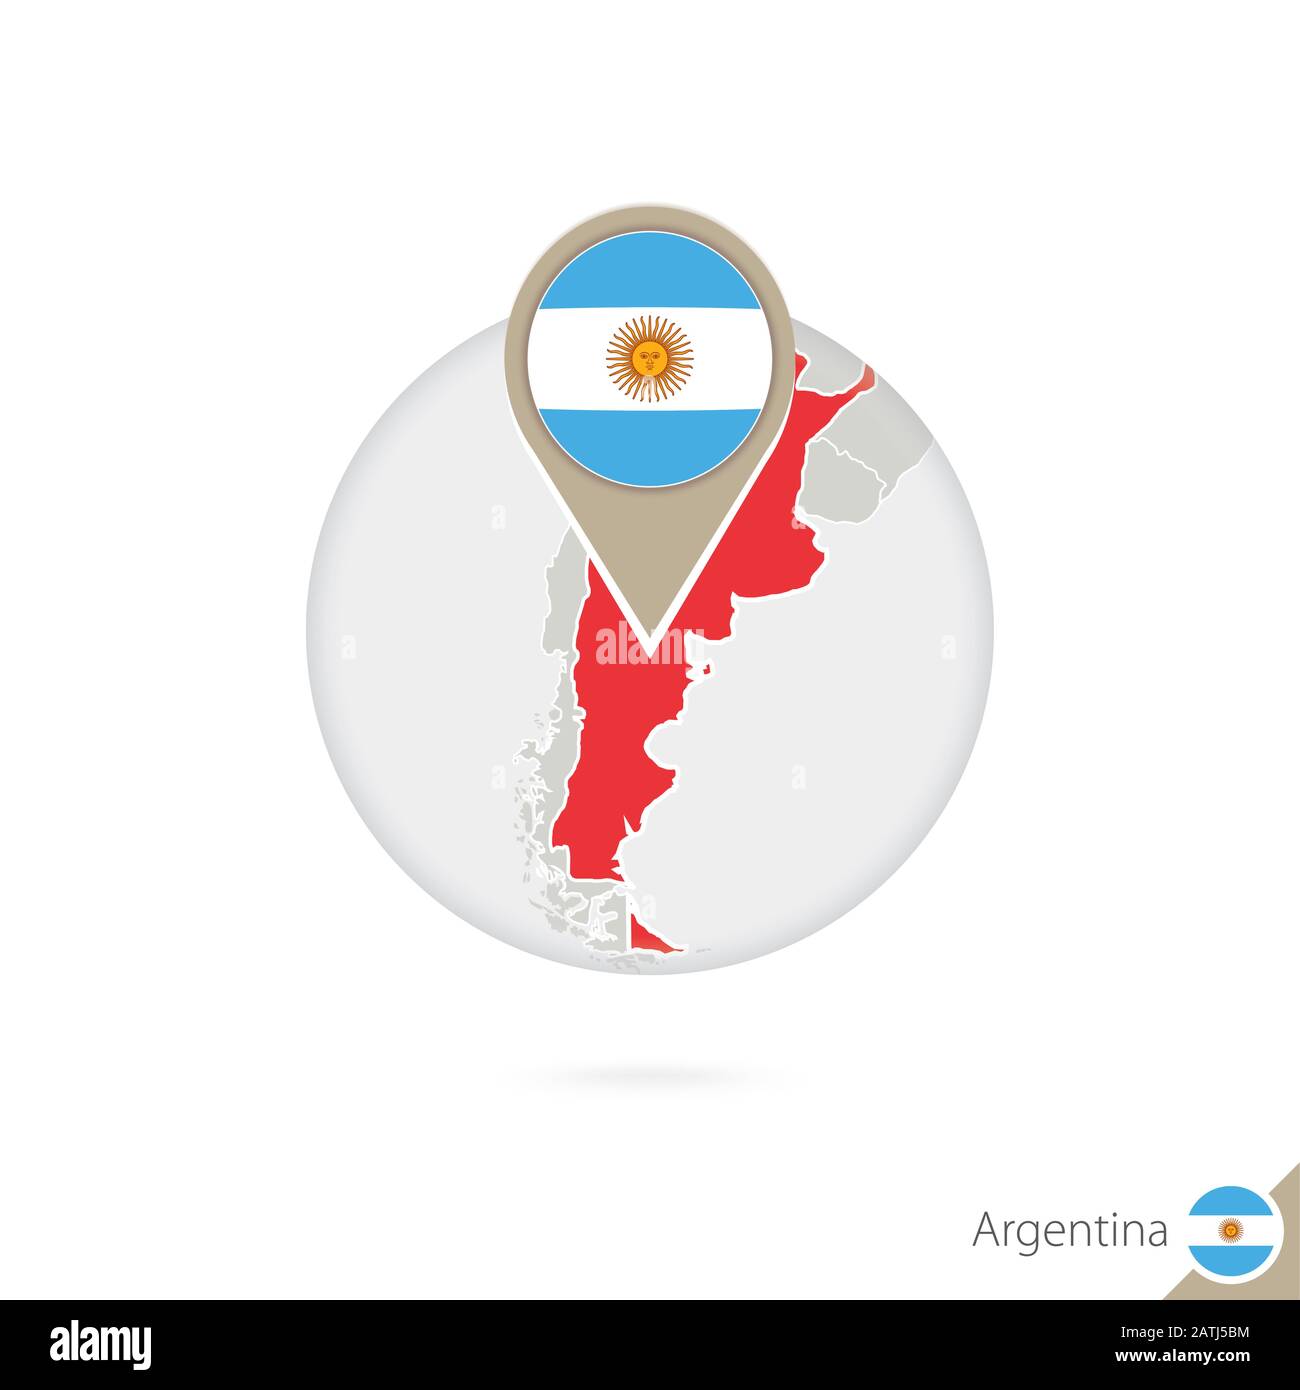 Argentina map and flag in circle. Map of Argentina, Argentina flag pin. Map of Argentina in the style of the globe. Vector Illustration. Stock Vector